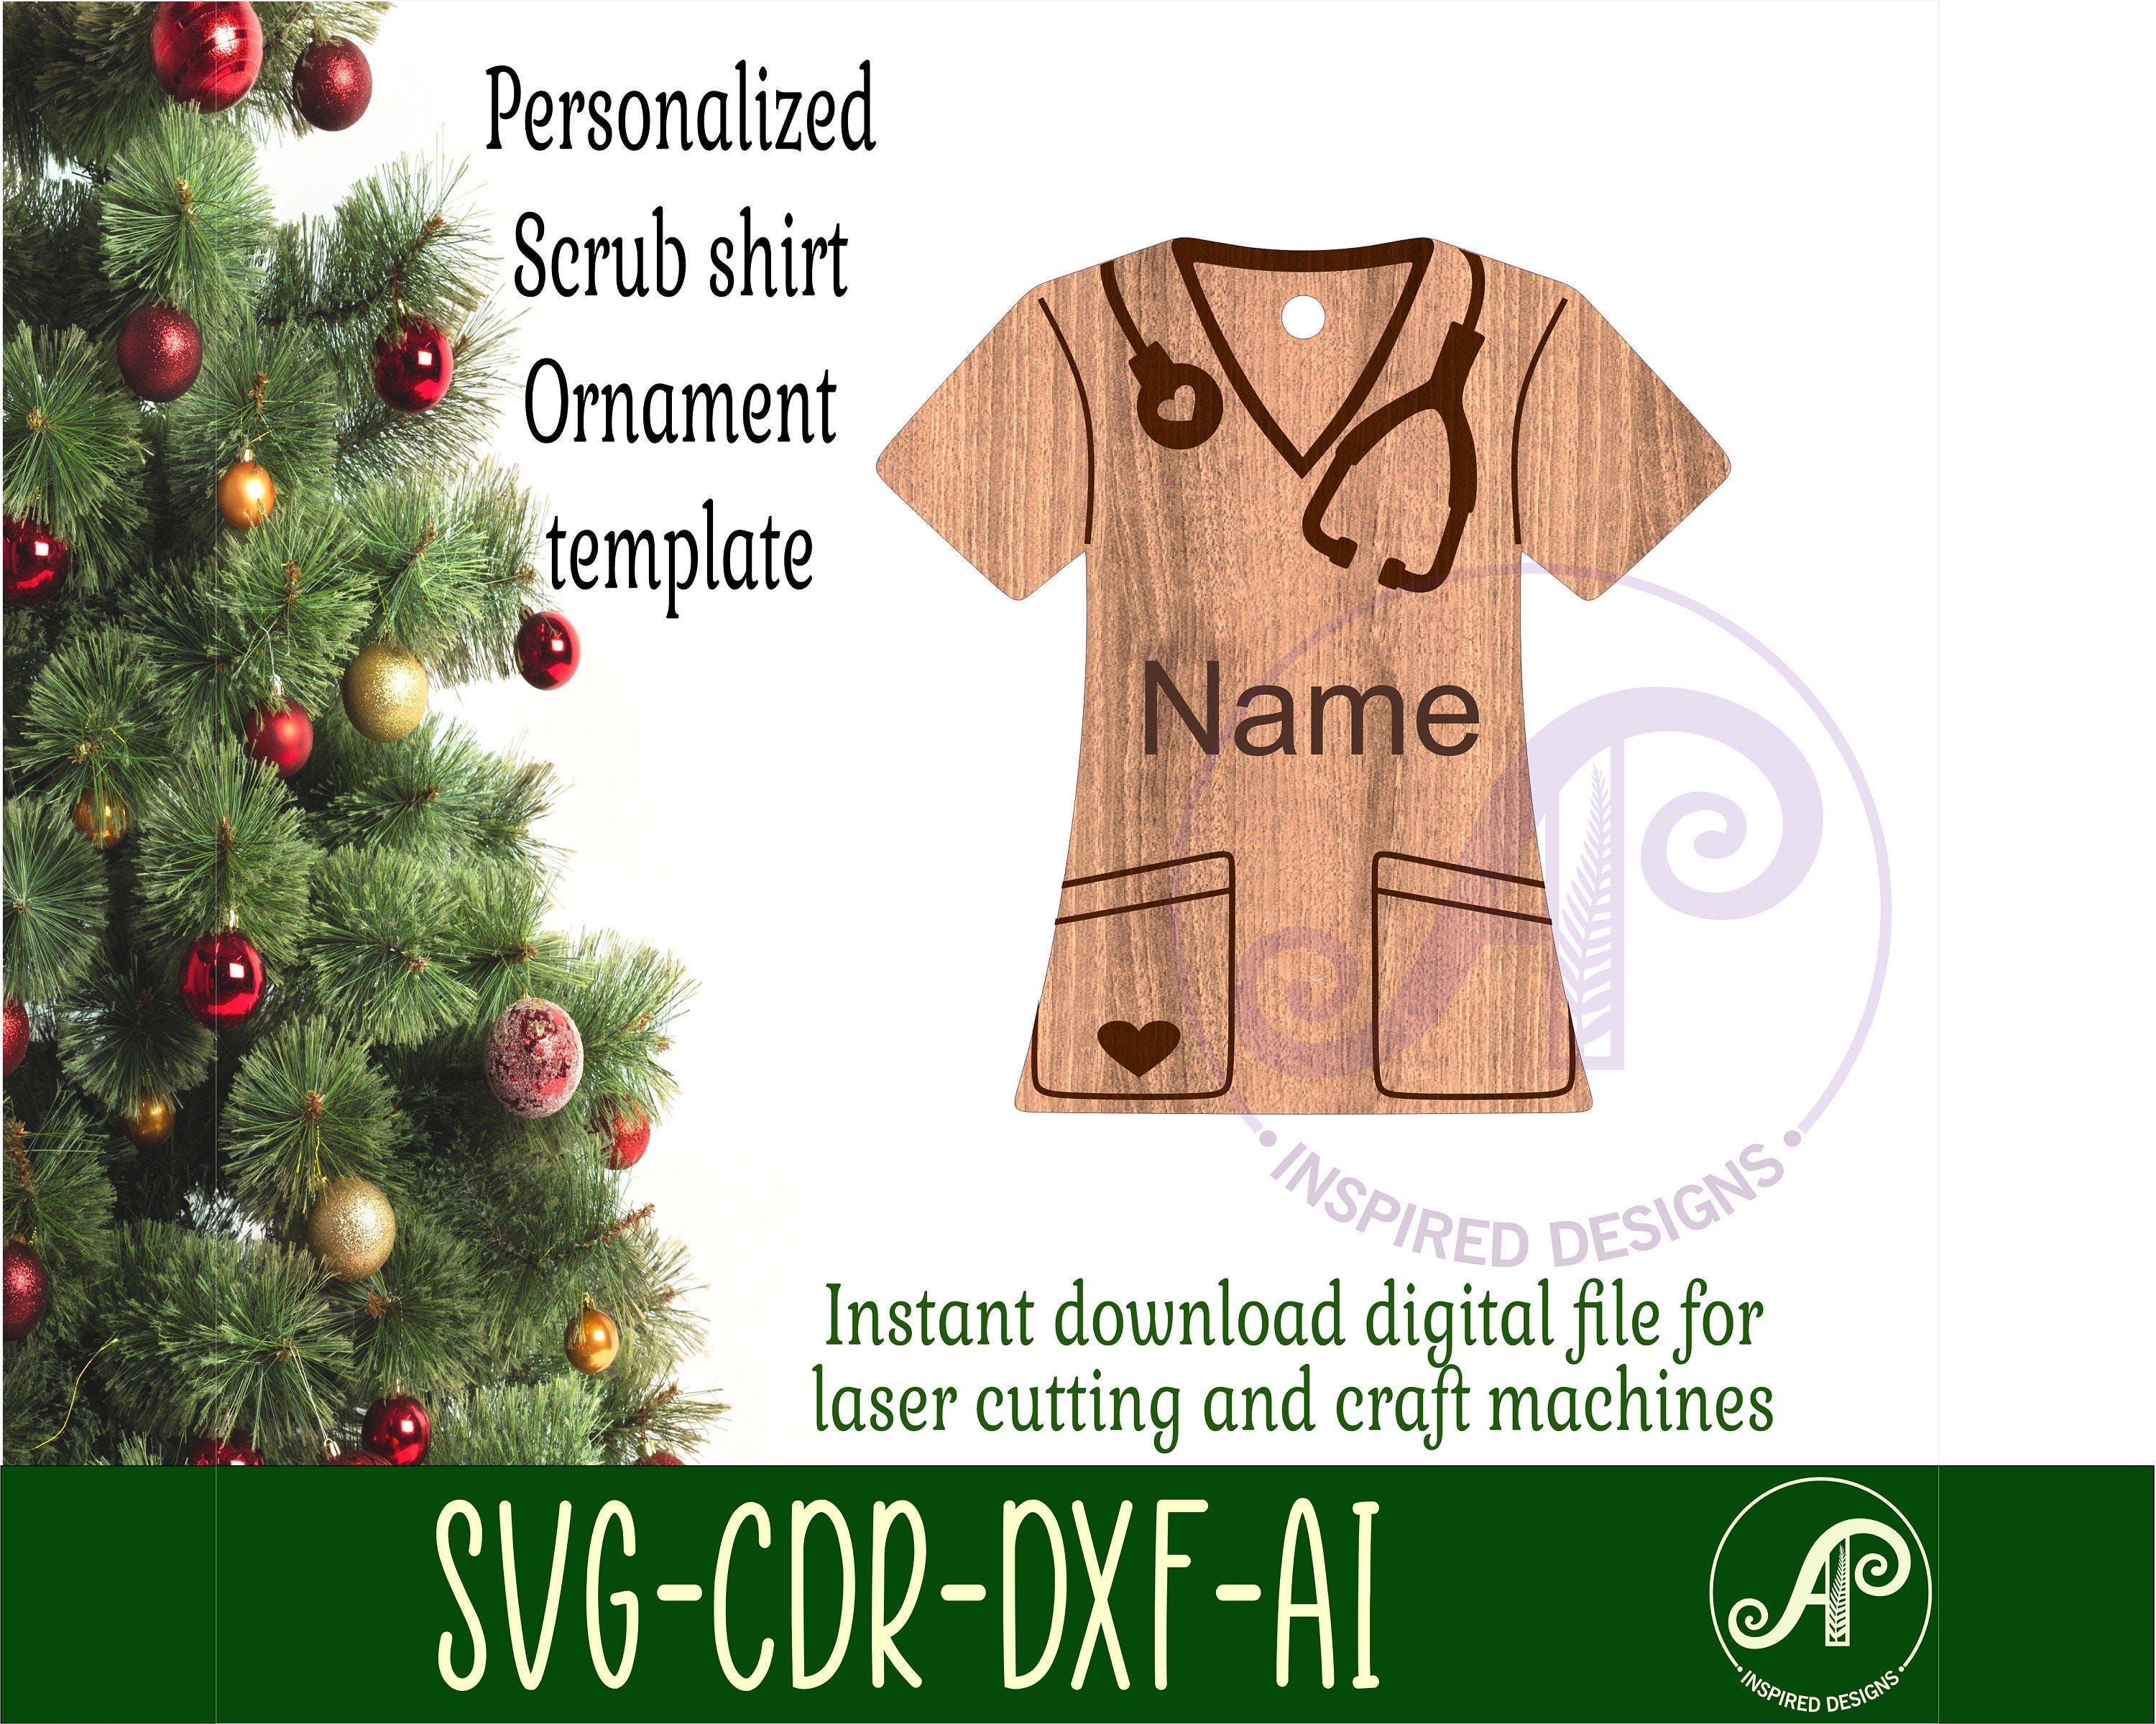 Scrub Christmas Ornaments SVG laser cut, instant download Pdf, Dxf, Ai and Cdr template.